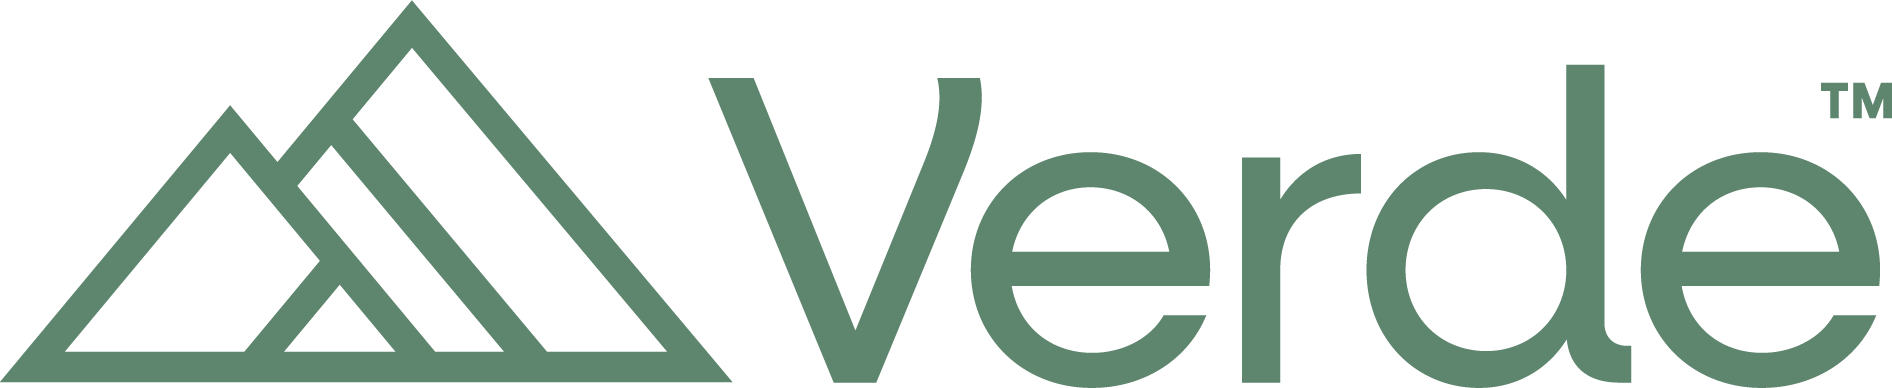 About Verde - Digital Marketing for Luxury Fashion & Sports Brands